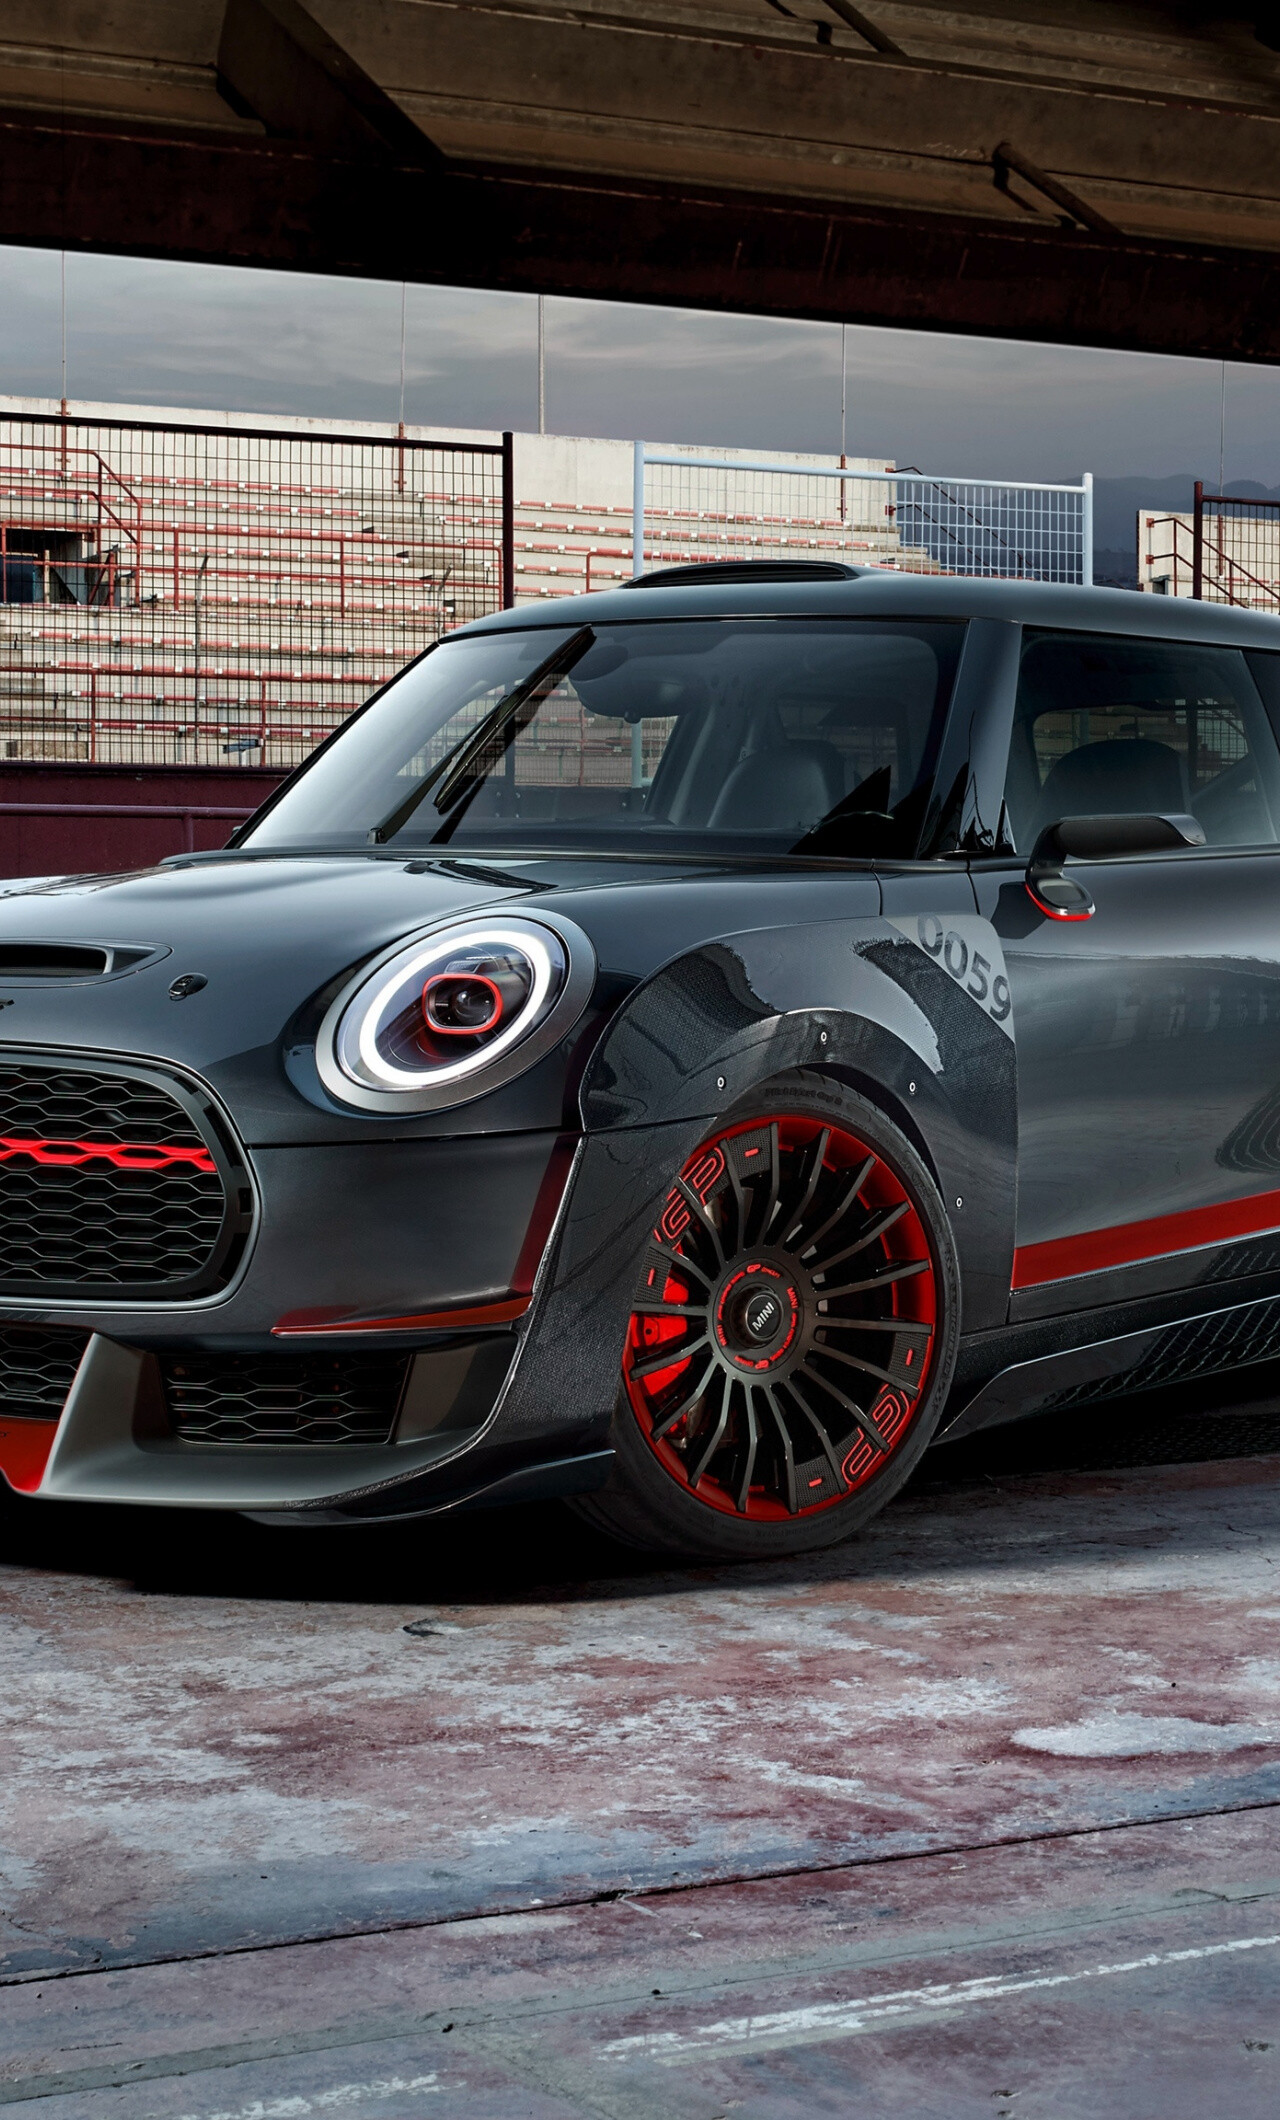 MINI Cooper: The original two-door model was produced from 1959 until 2000. 1280x2120 HD Wallpaper.